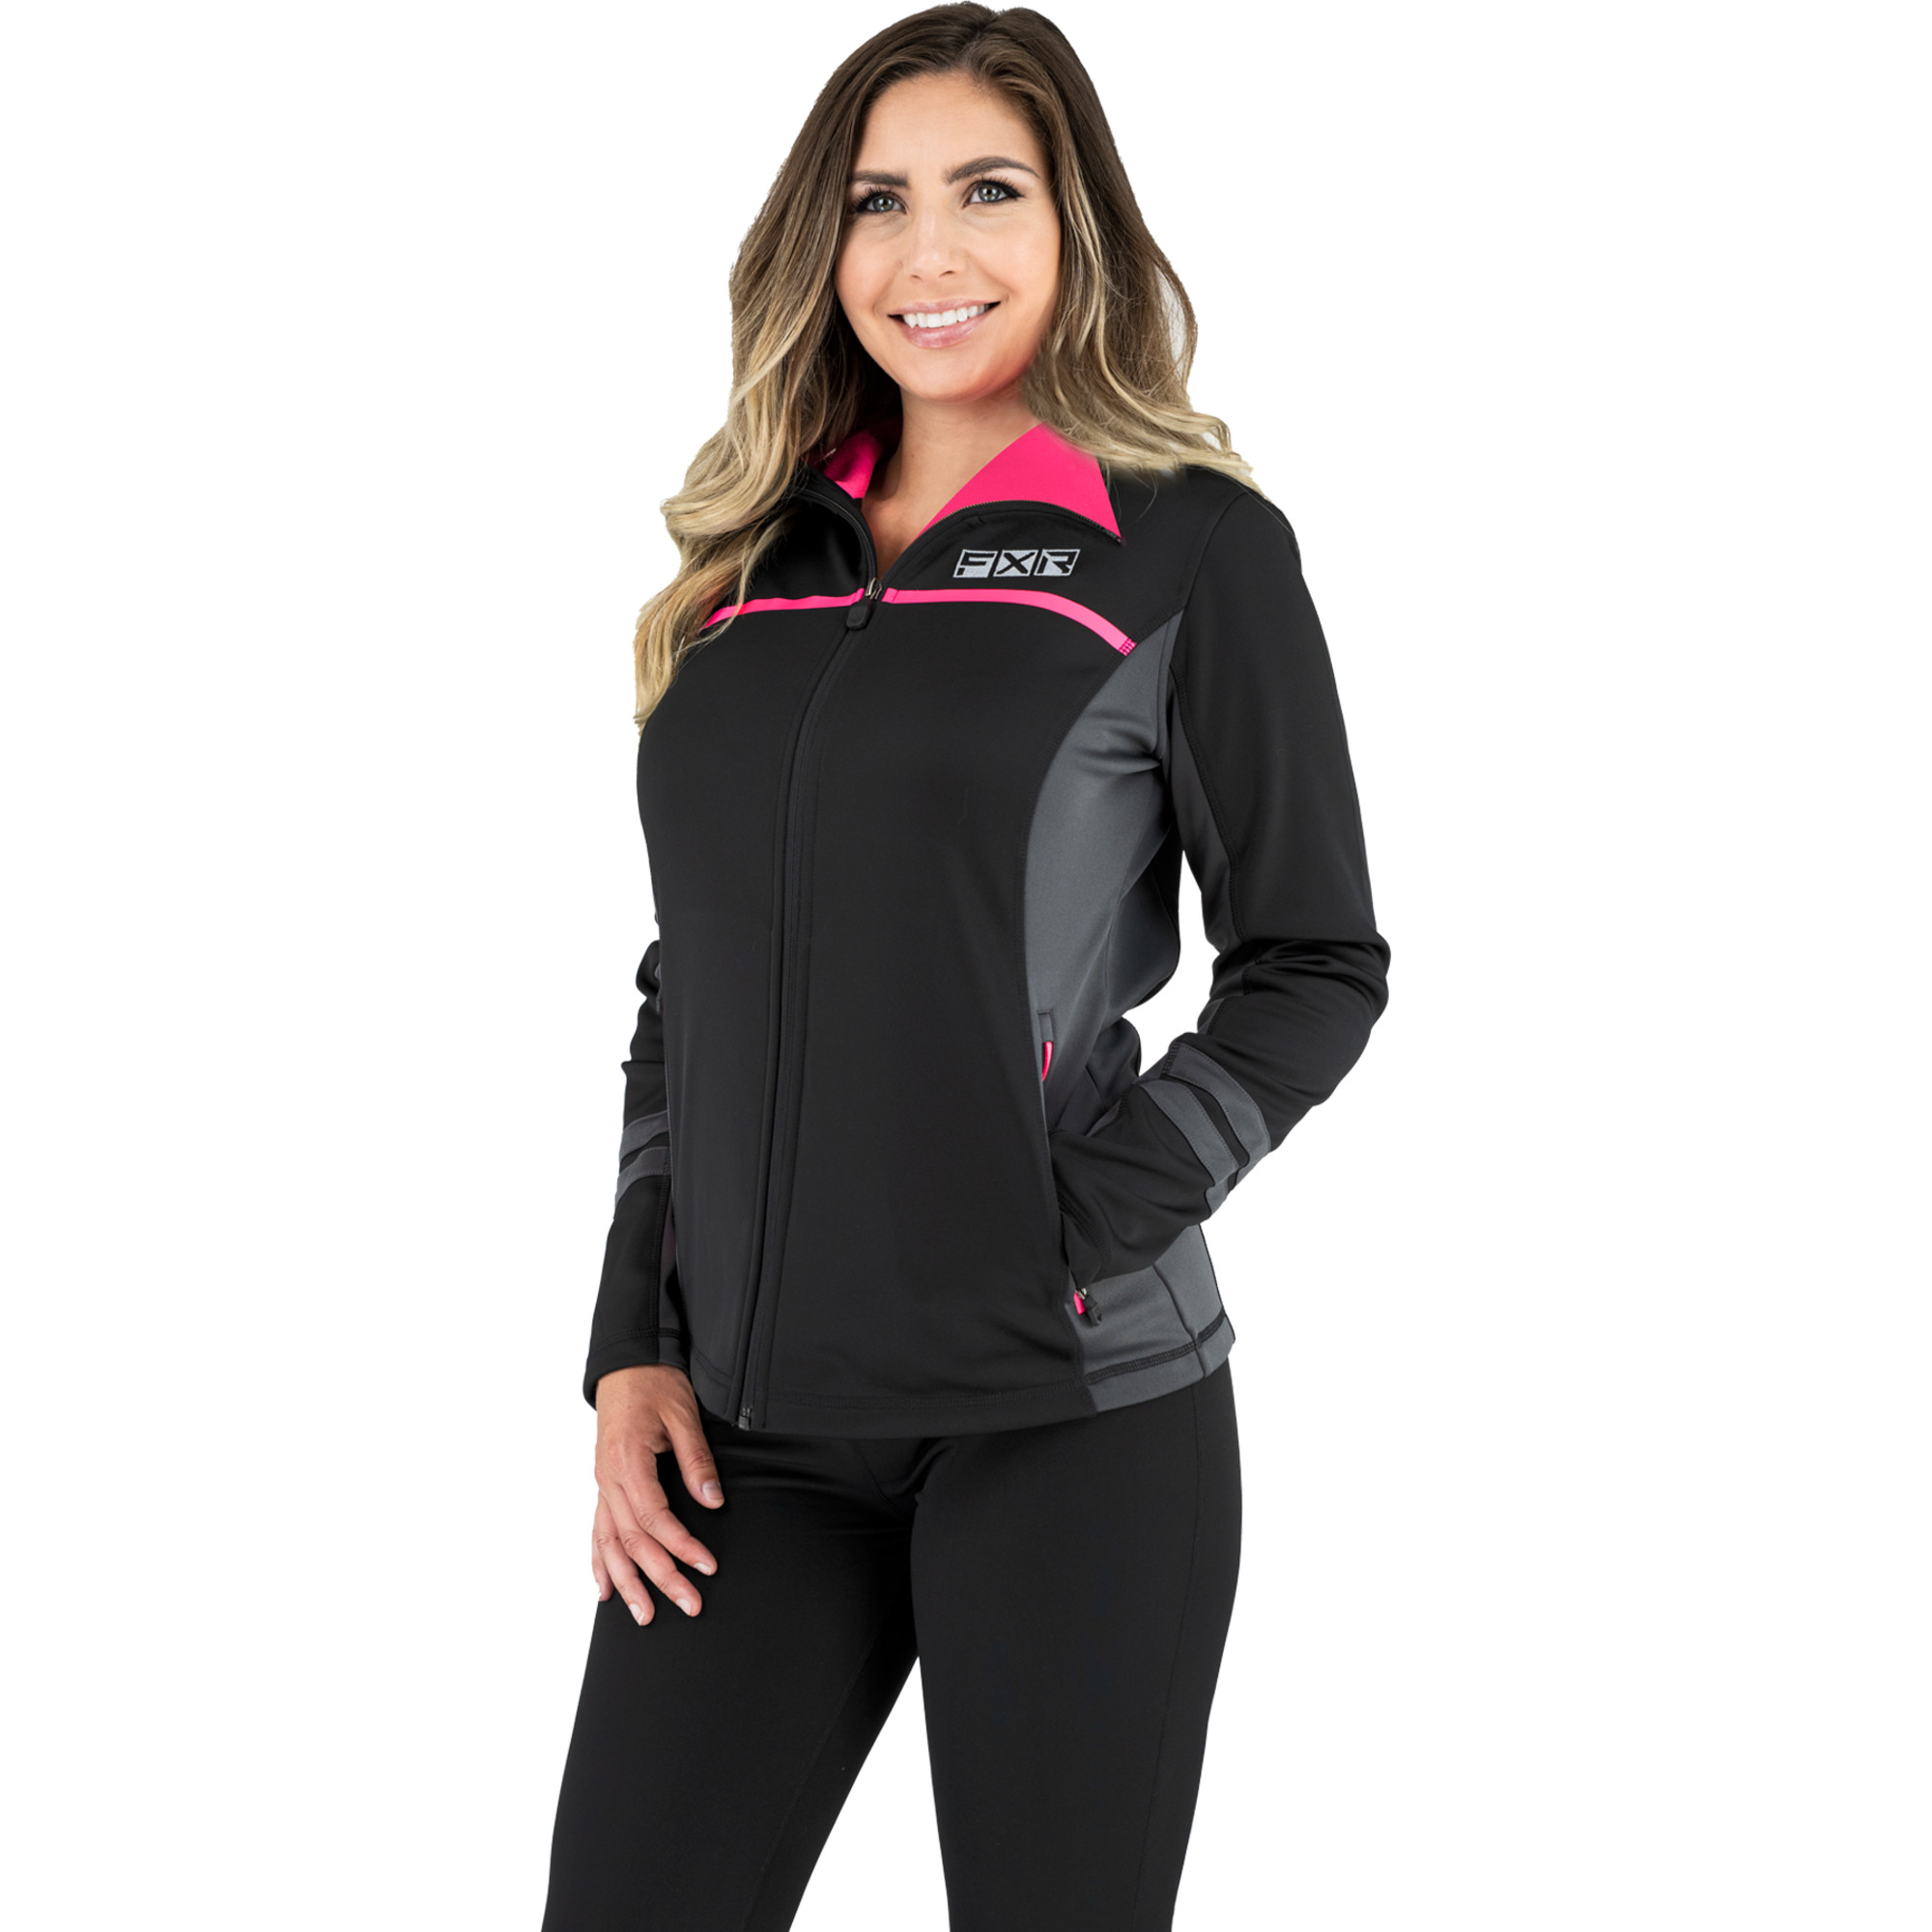 fxr racing top baselayers for womens elevation tech zipup